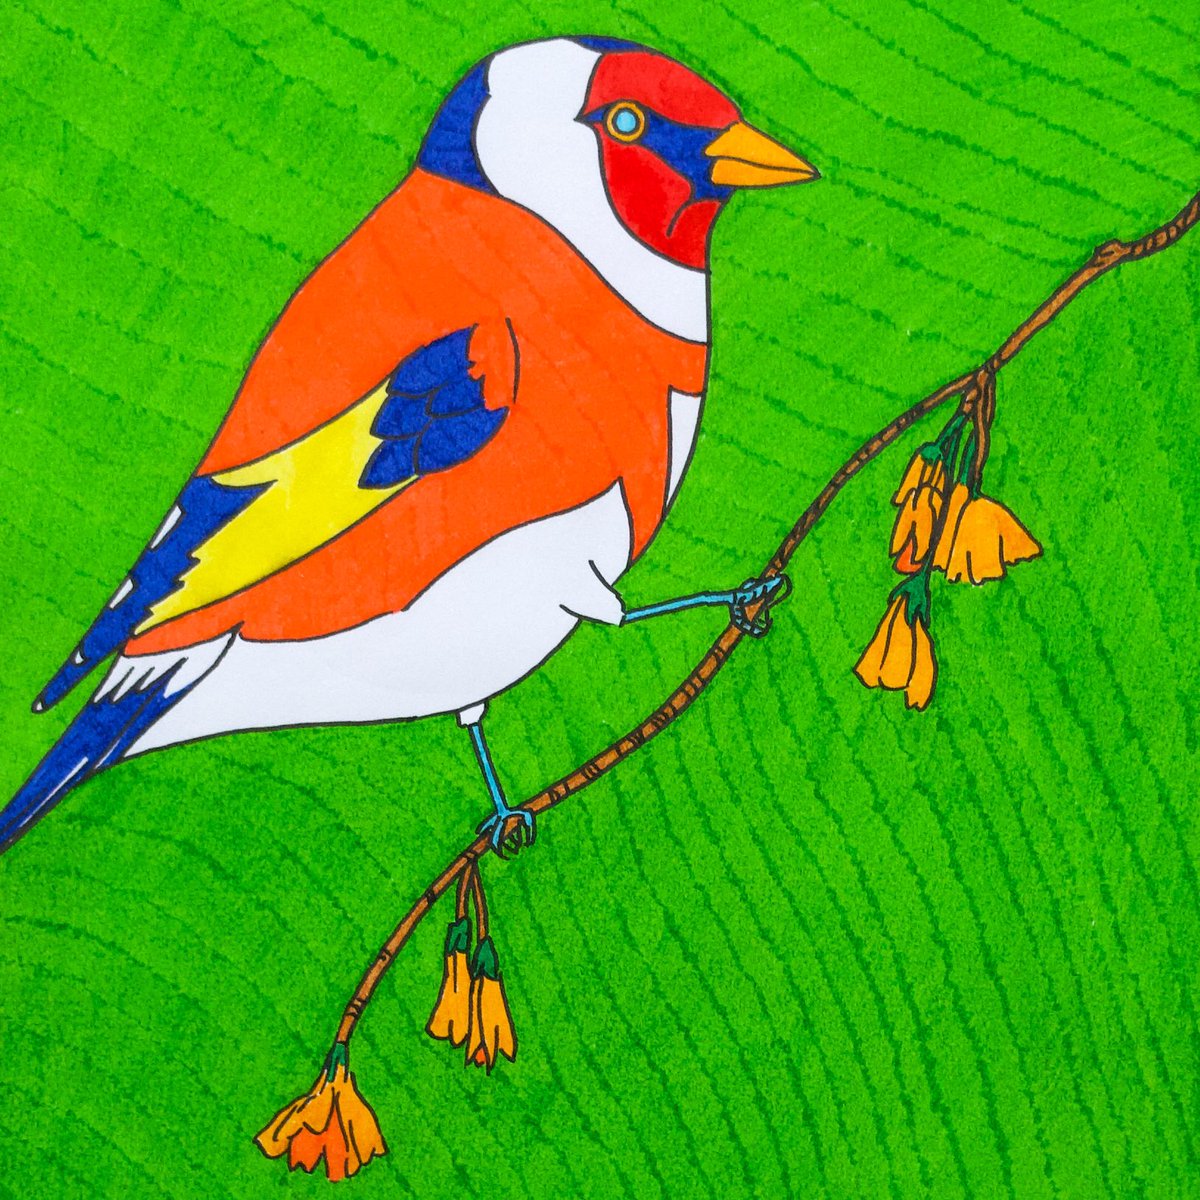 Each work is in ink on paper & is A3 sized (11.7 x 16.4 inches; 29.7 x 42cm)An Irish Goldfinch (2020)